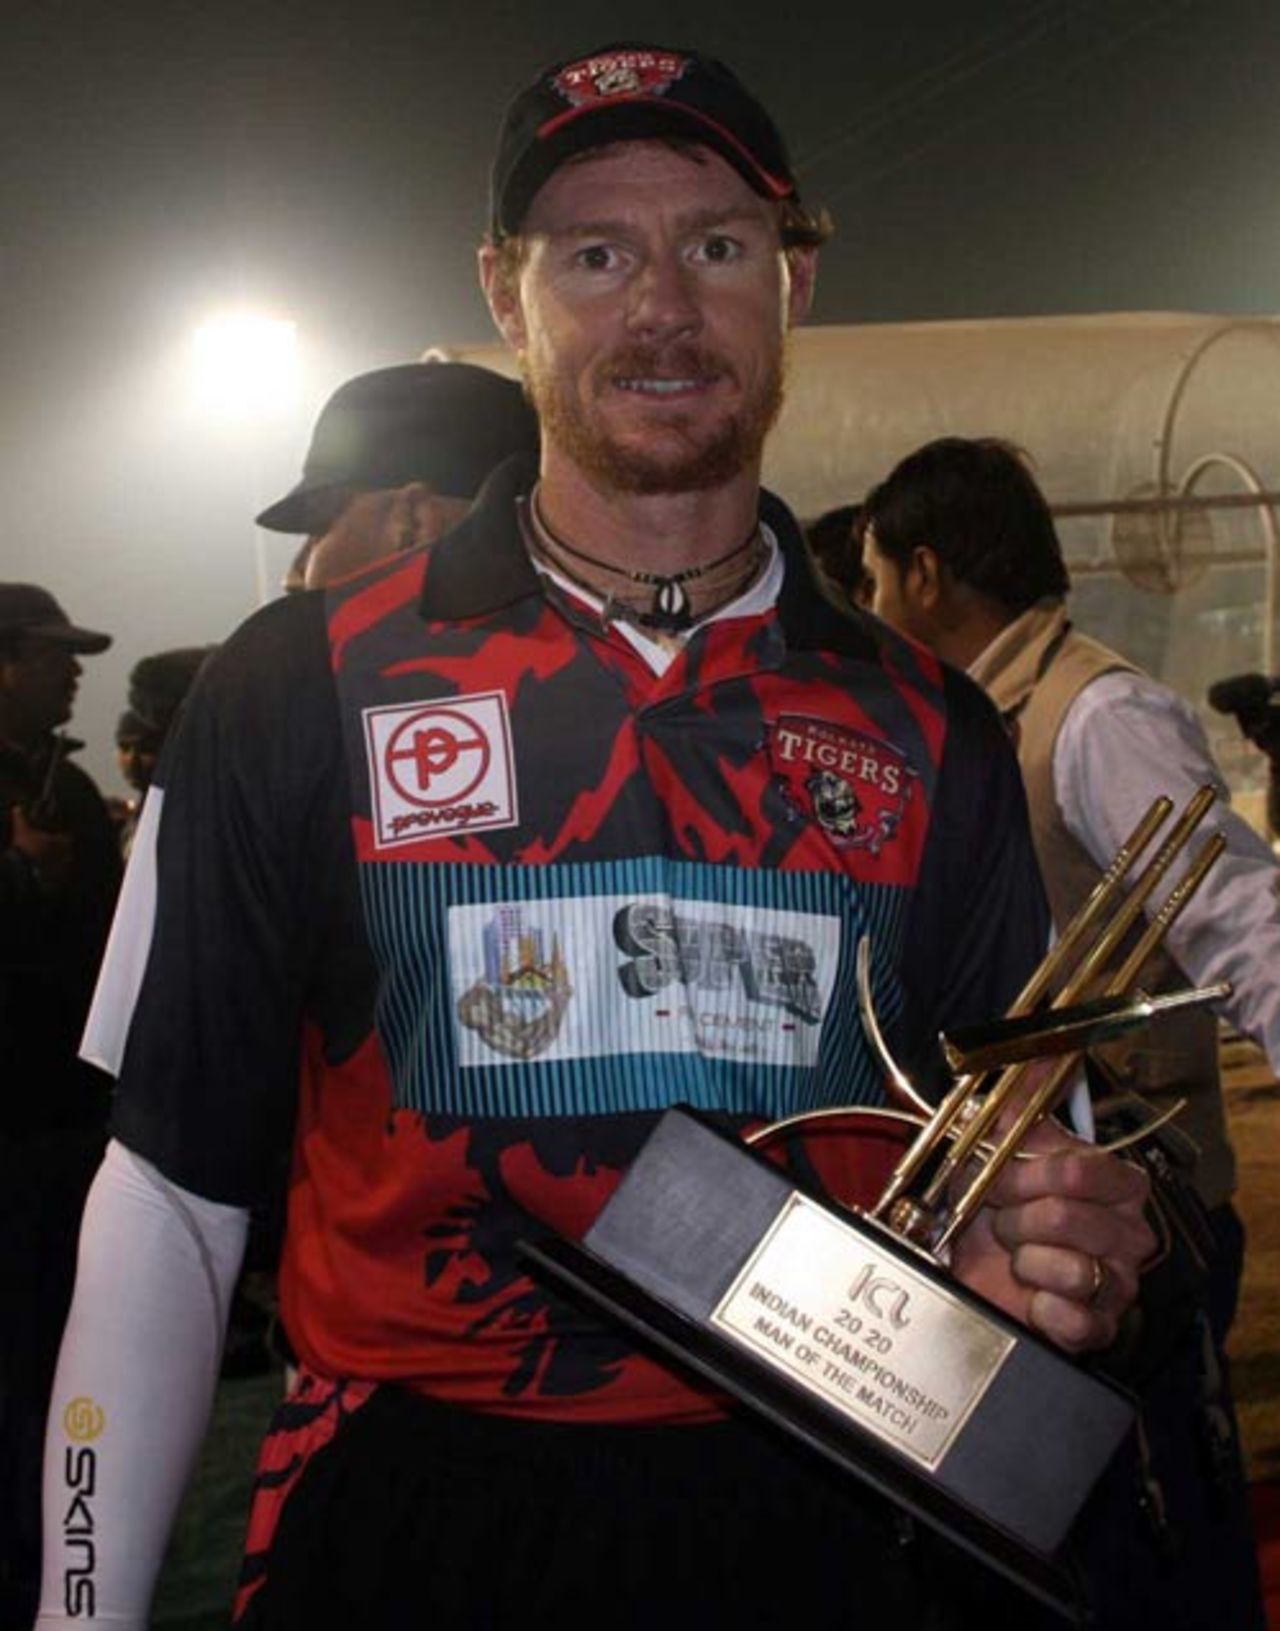 Lance Klusener's excellent all-round performance earned him the Man-of-the-Match performance, Delhi Jets v Kolkata Tigers, 10th match, Indian Cricket League, Panchkula, December 8, 2007